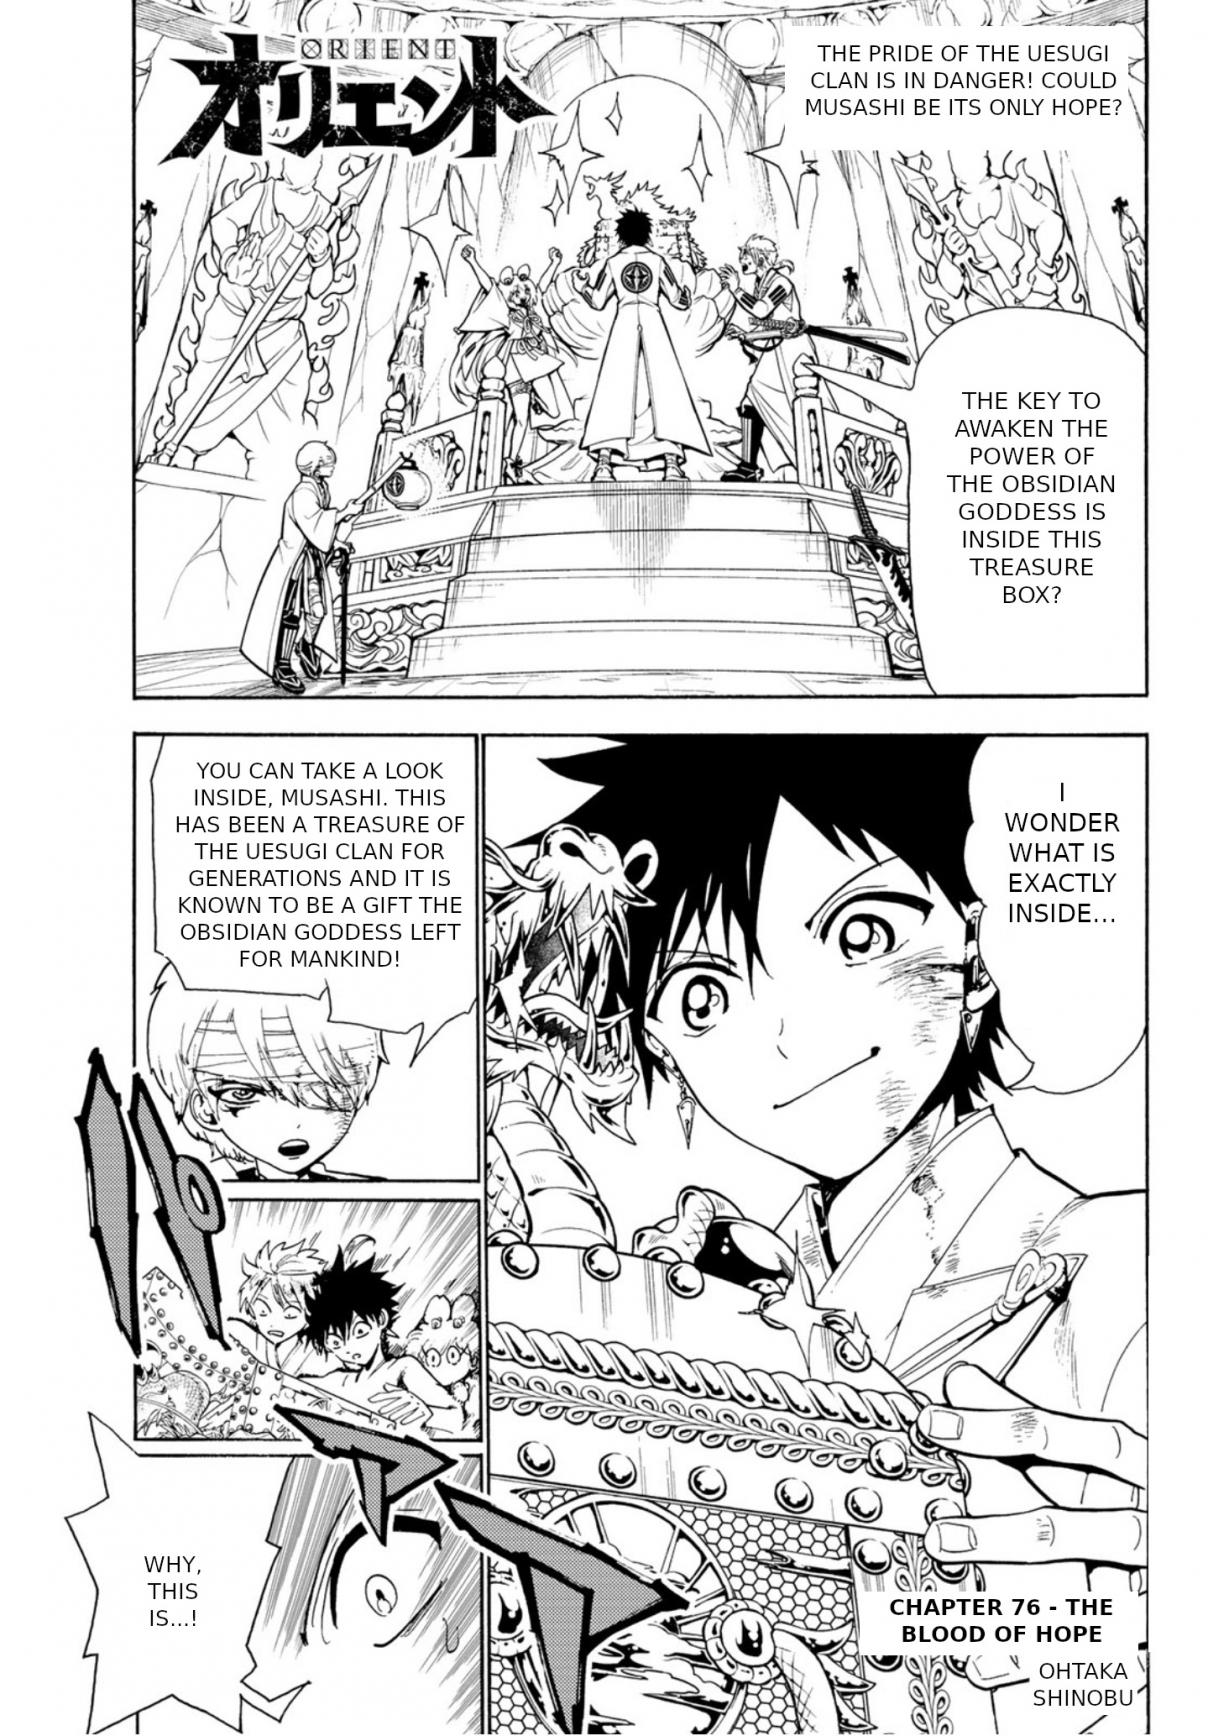 Orient Vol. 9 Ch. 76 The Blood of Hope